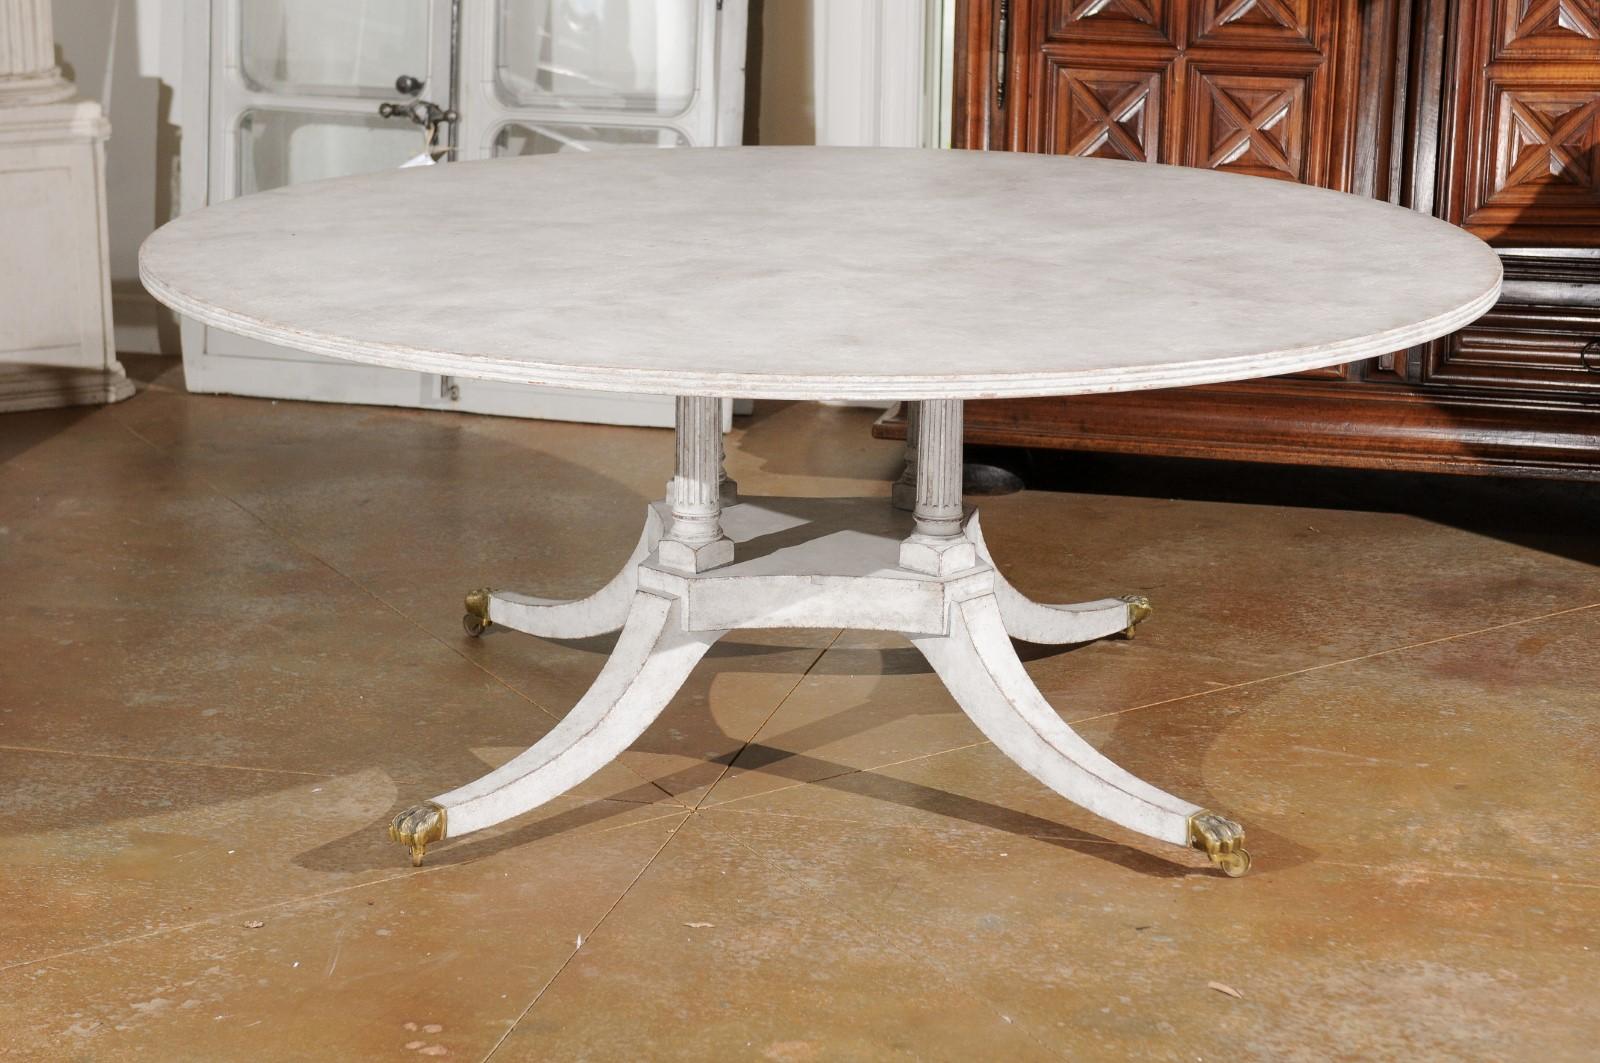 Regency Style Painted Wood Round Top Table with Brass Paw Feet and Casters 1